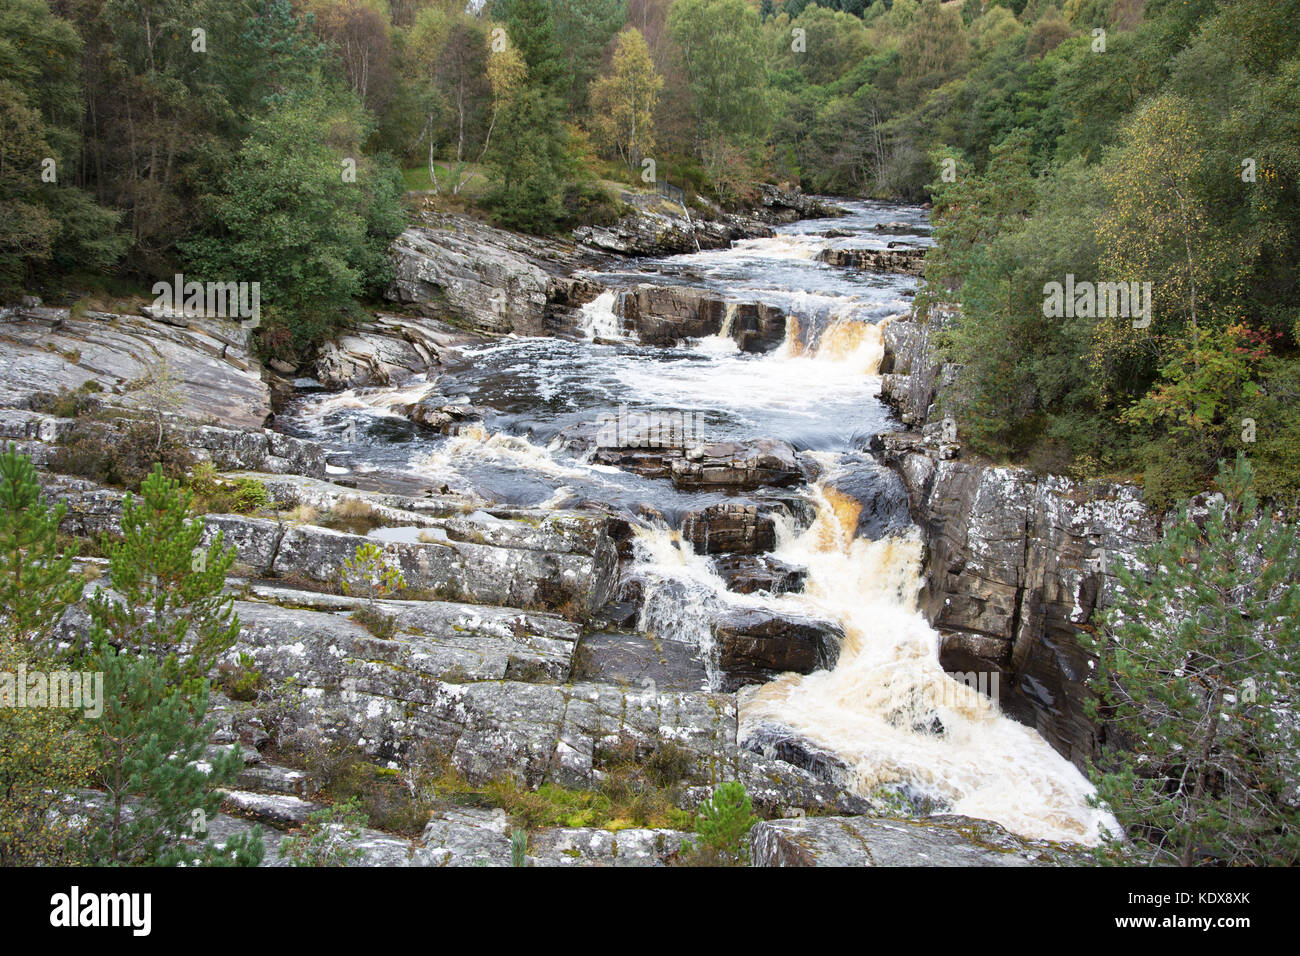 View of Black Water River upstream from Silverbridge Stock Photo